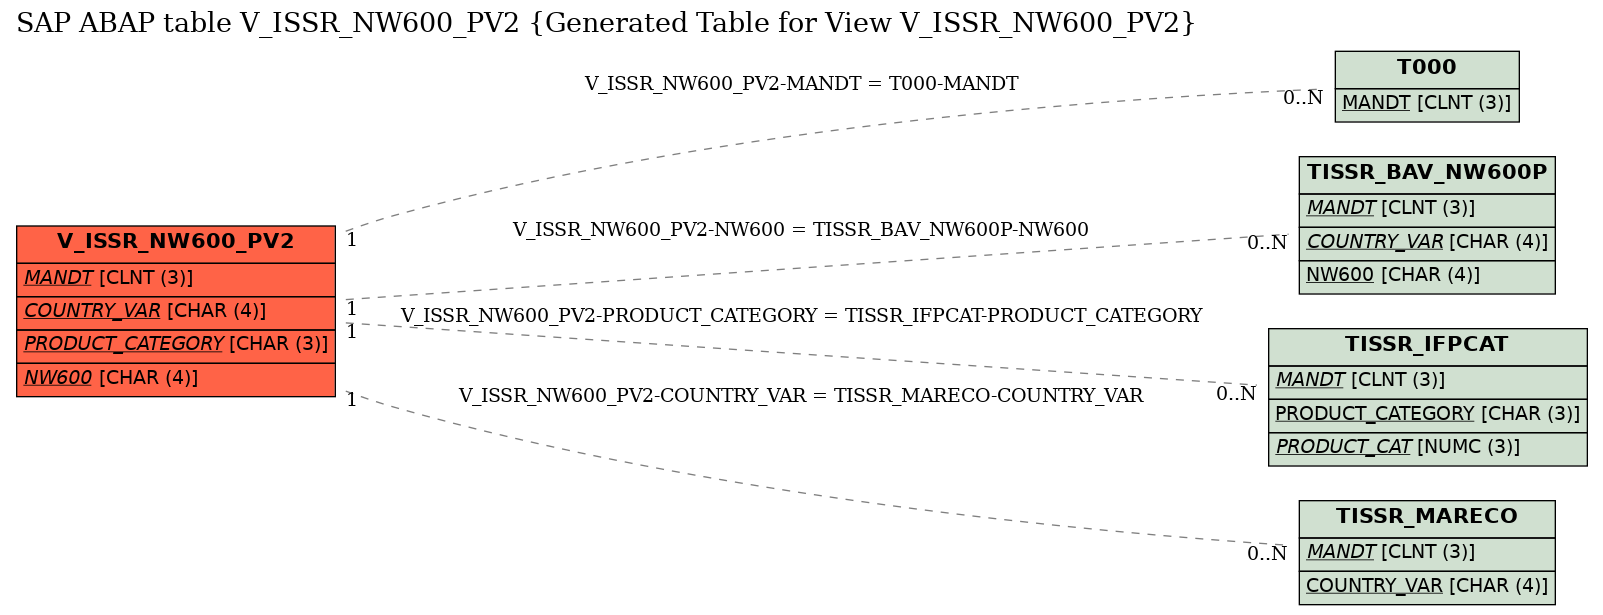 E-R Diagram for table V_ISSR_NW600_PV2 (Generated Table for View V_ISSR_NW600_PV2)